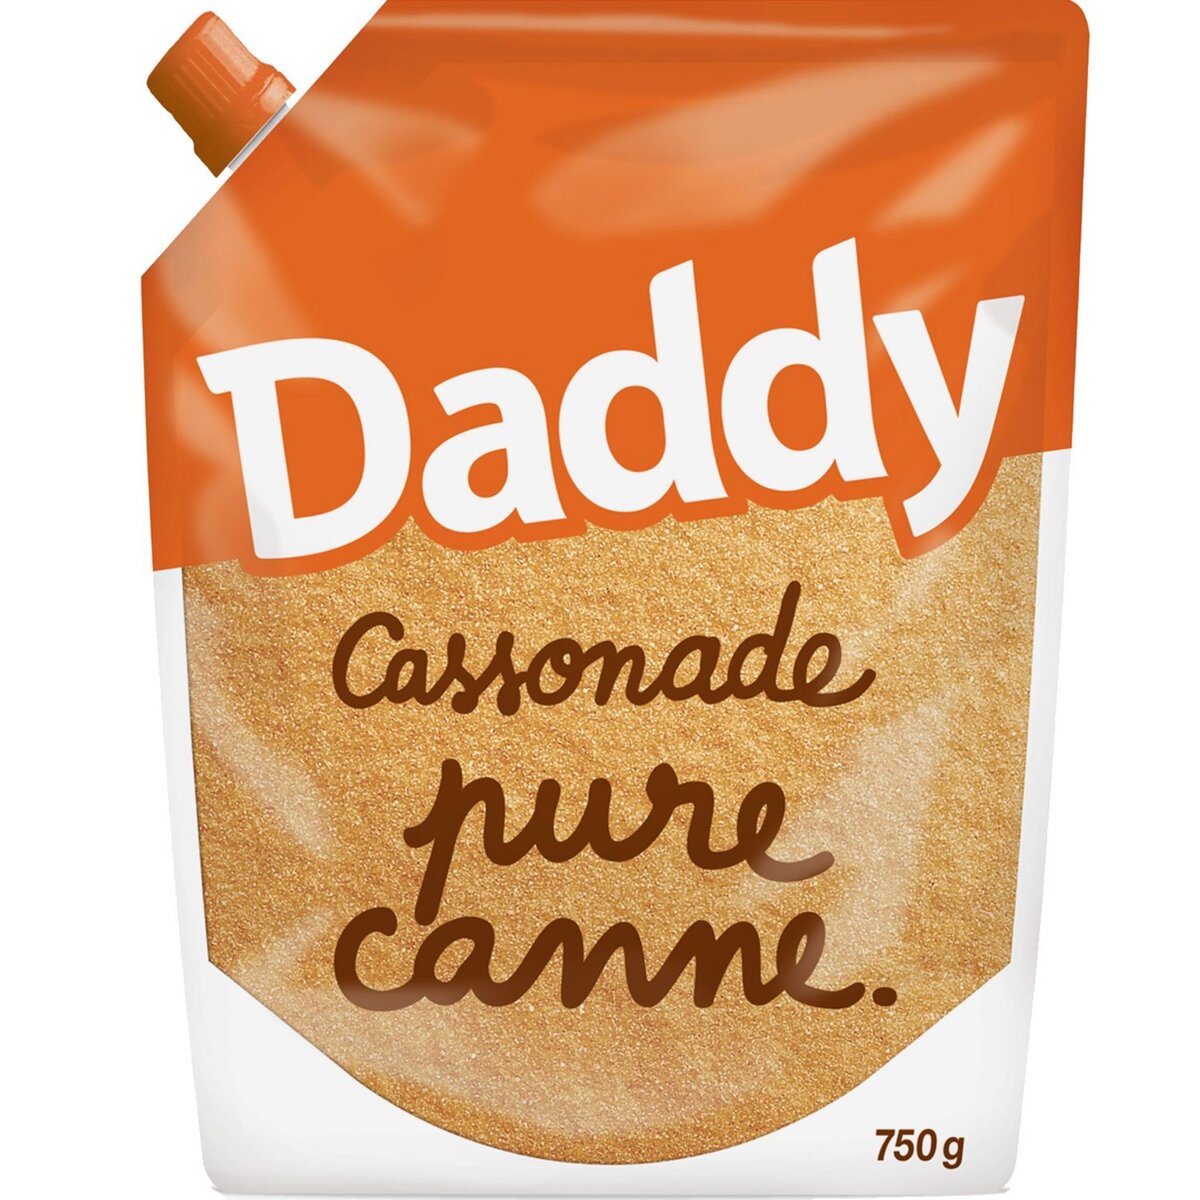 DADDY Cassonnade pure canne en poudre 750g